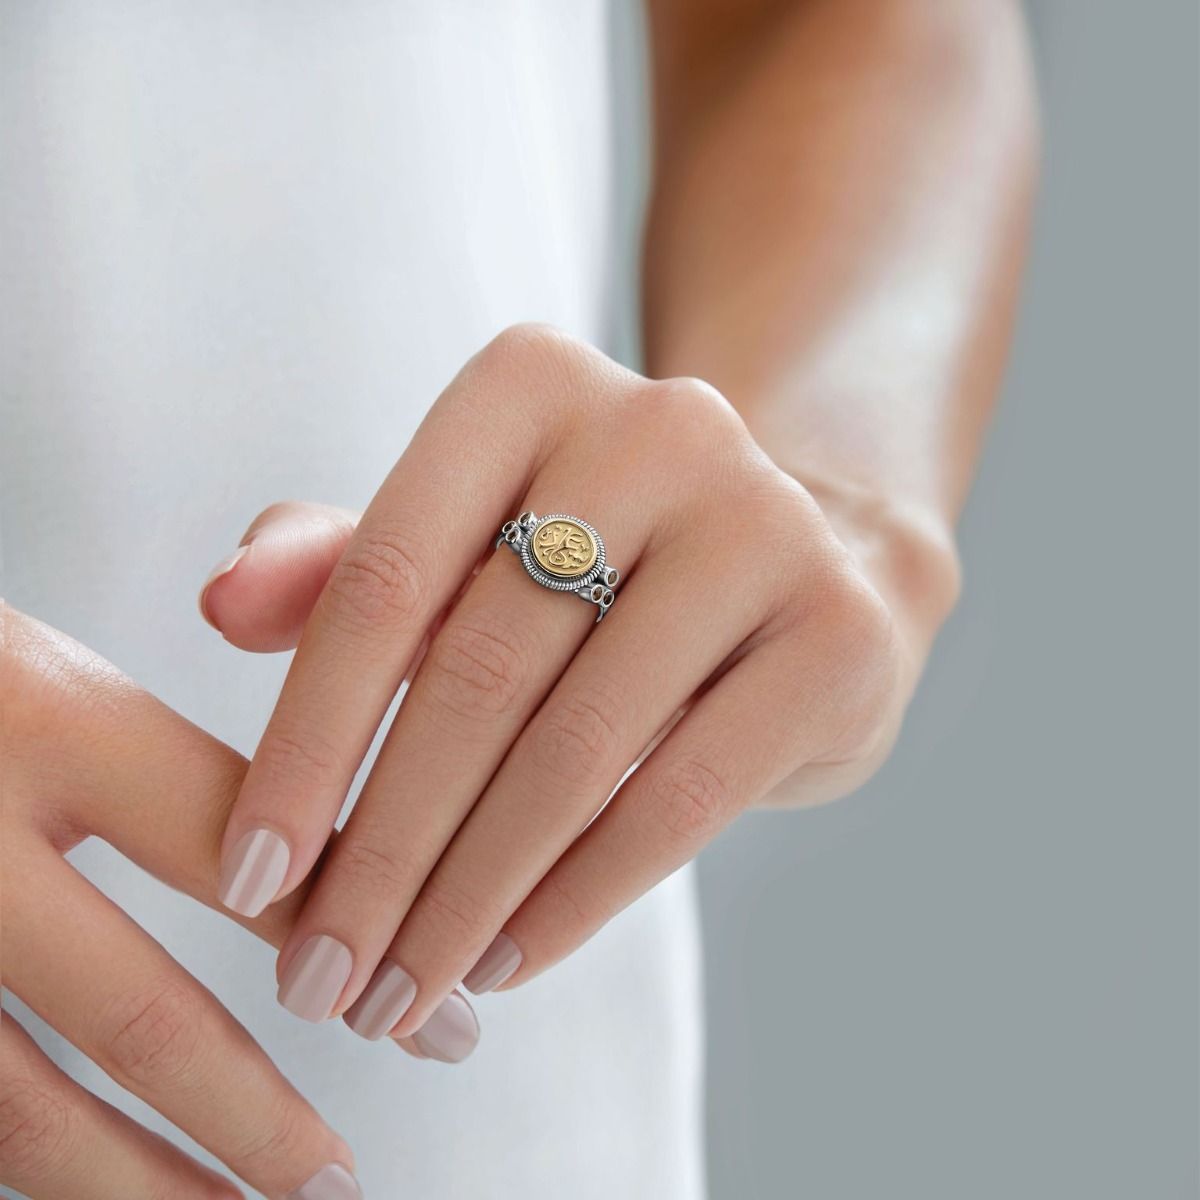 The Happiness Ring by Azza Fahmy - Designer Rings